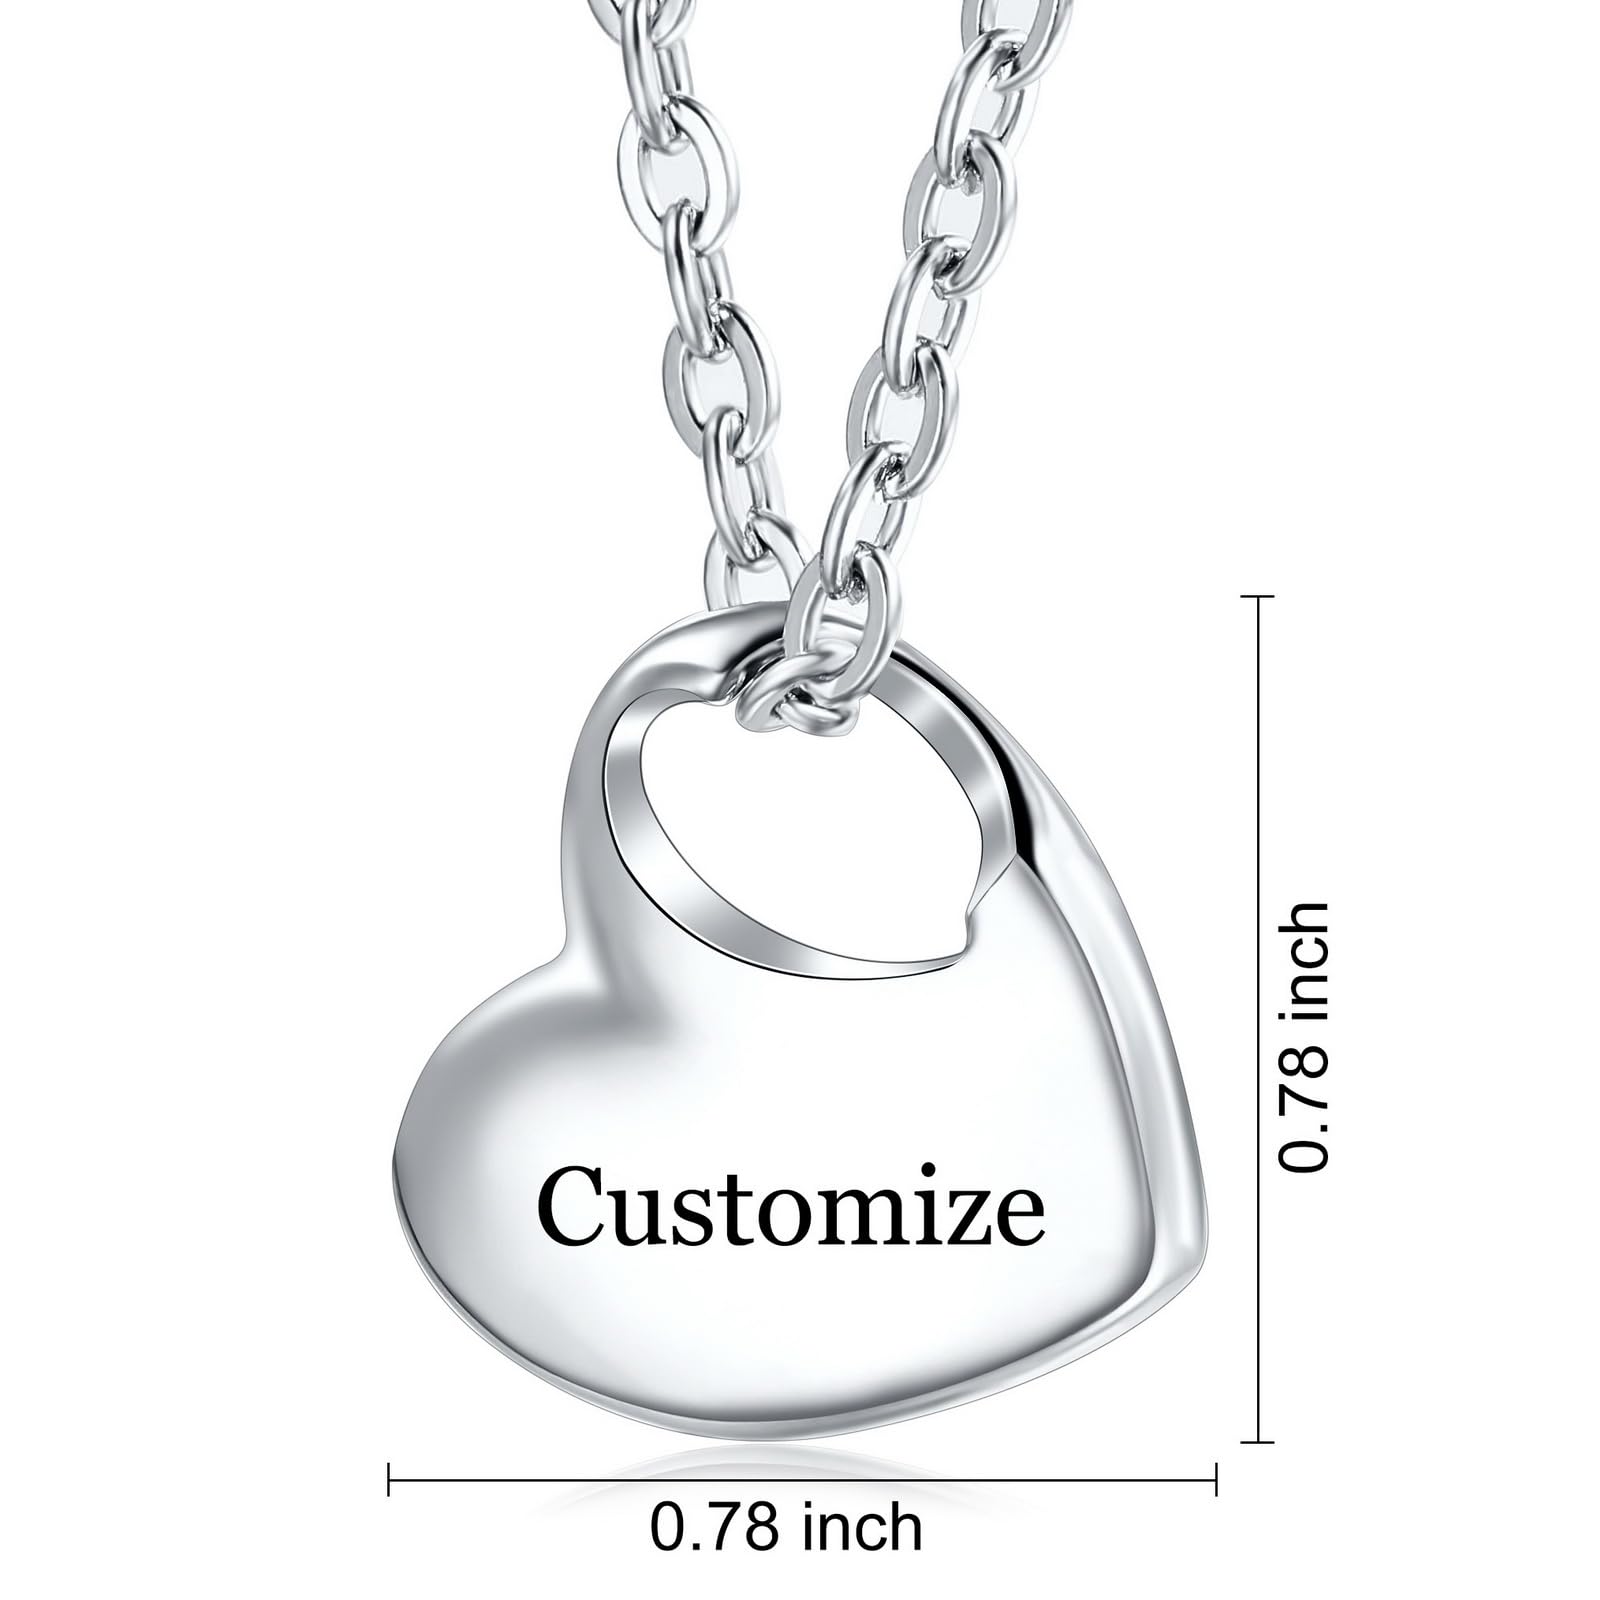 INBLUE Cremation Heart Urn Necklace for Ashes Urn Jewelry, Forever in My Heart for Dad Mom Customized Stainless Steel Keepsake Pendant Memorial Locket for Women Men with Filling Kit